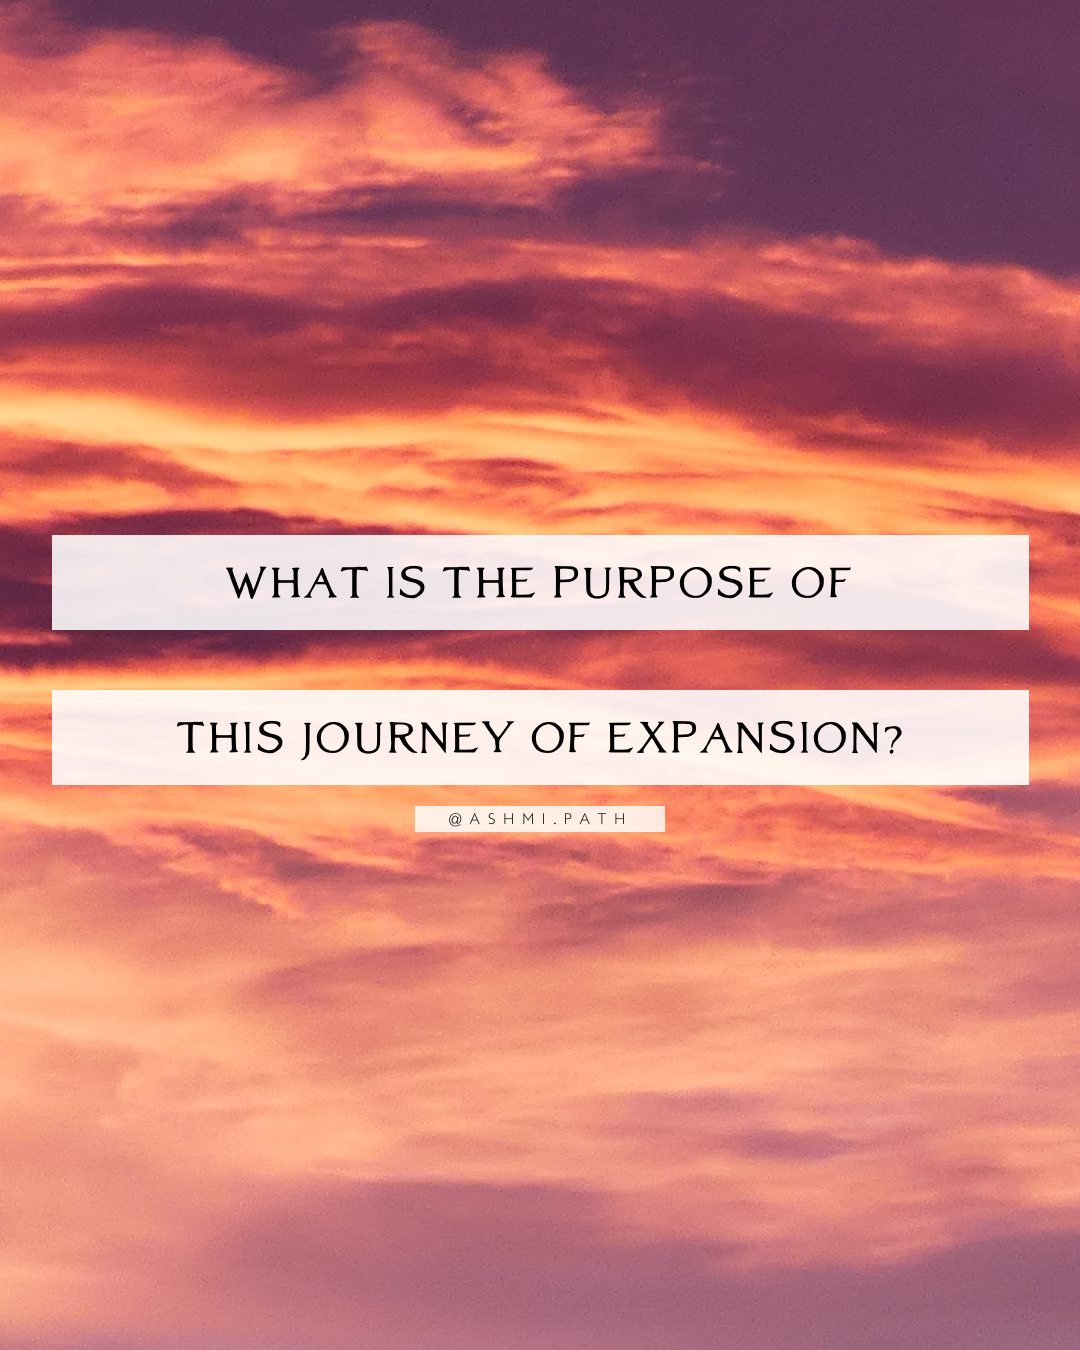 What is the Purpose of this Journey of Expansion?